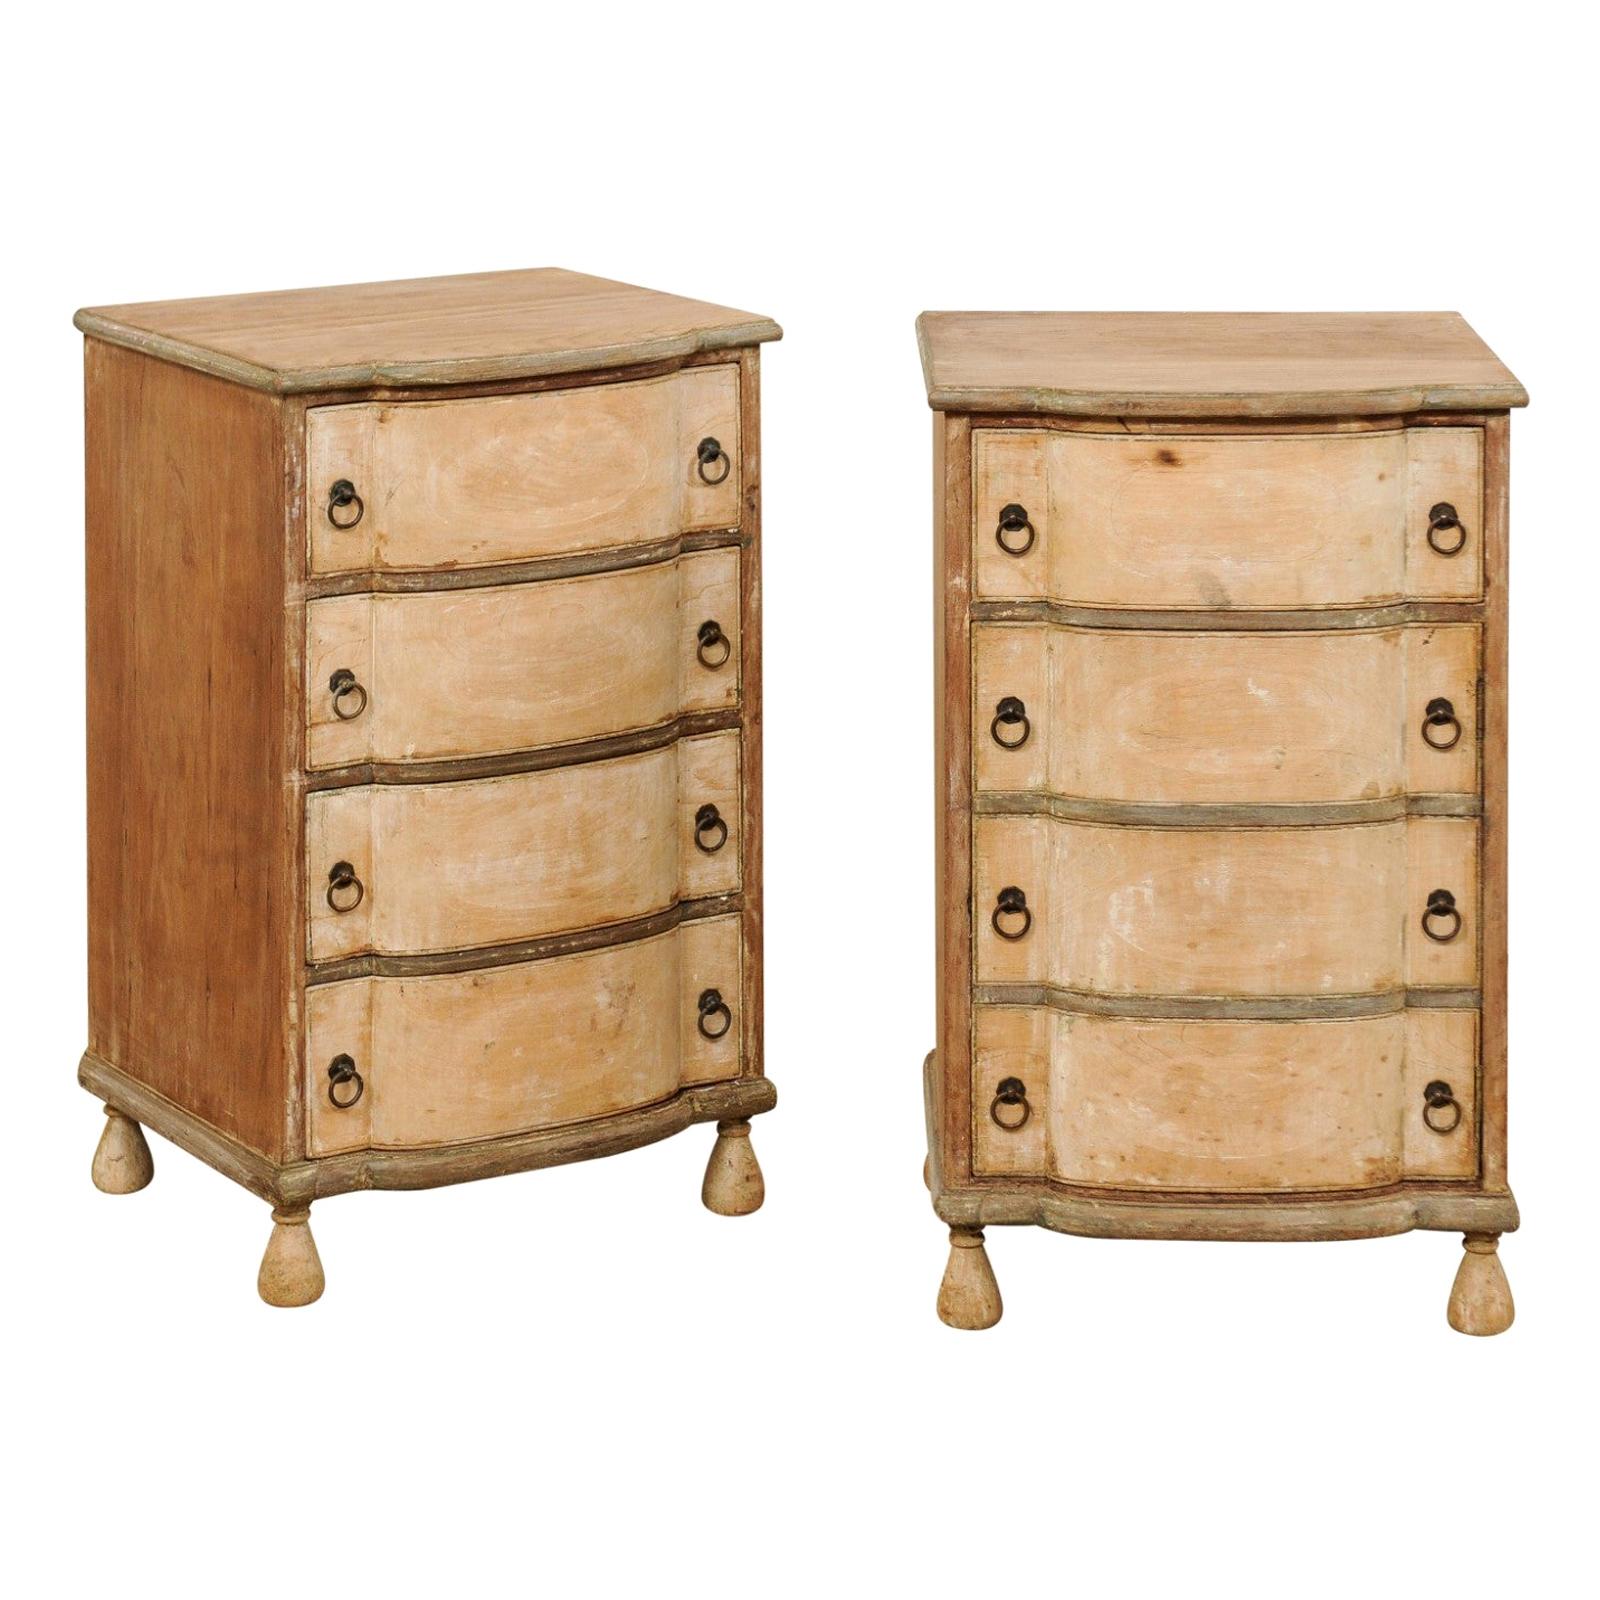 Italian Petite Comodini '1 with Drawers and 1 a Cabinet with Faux Drawers', Pair